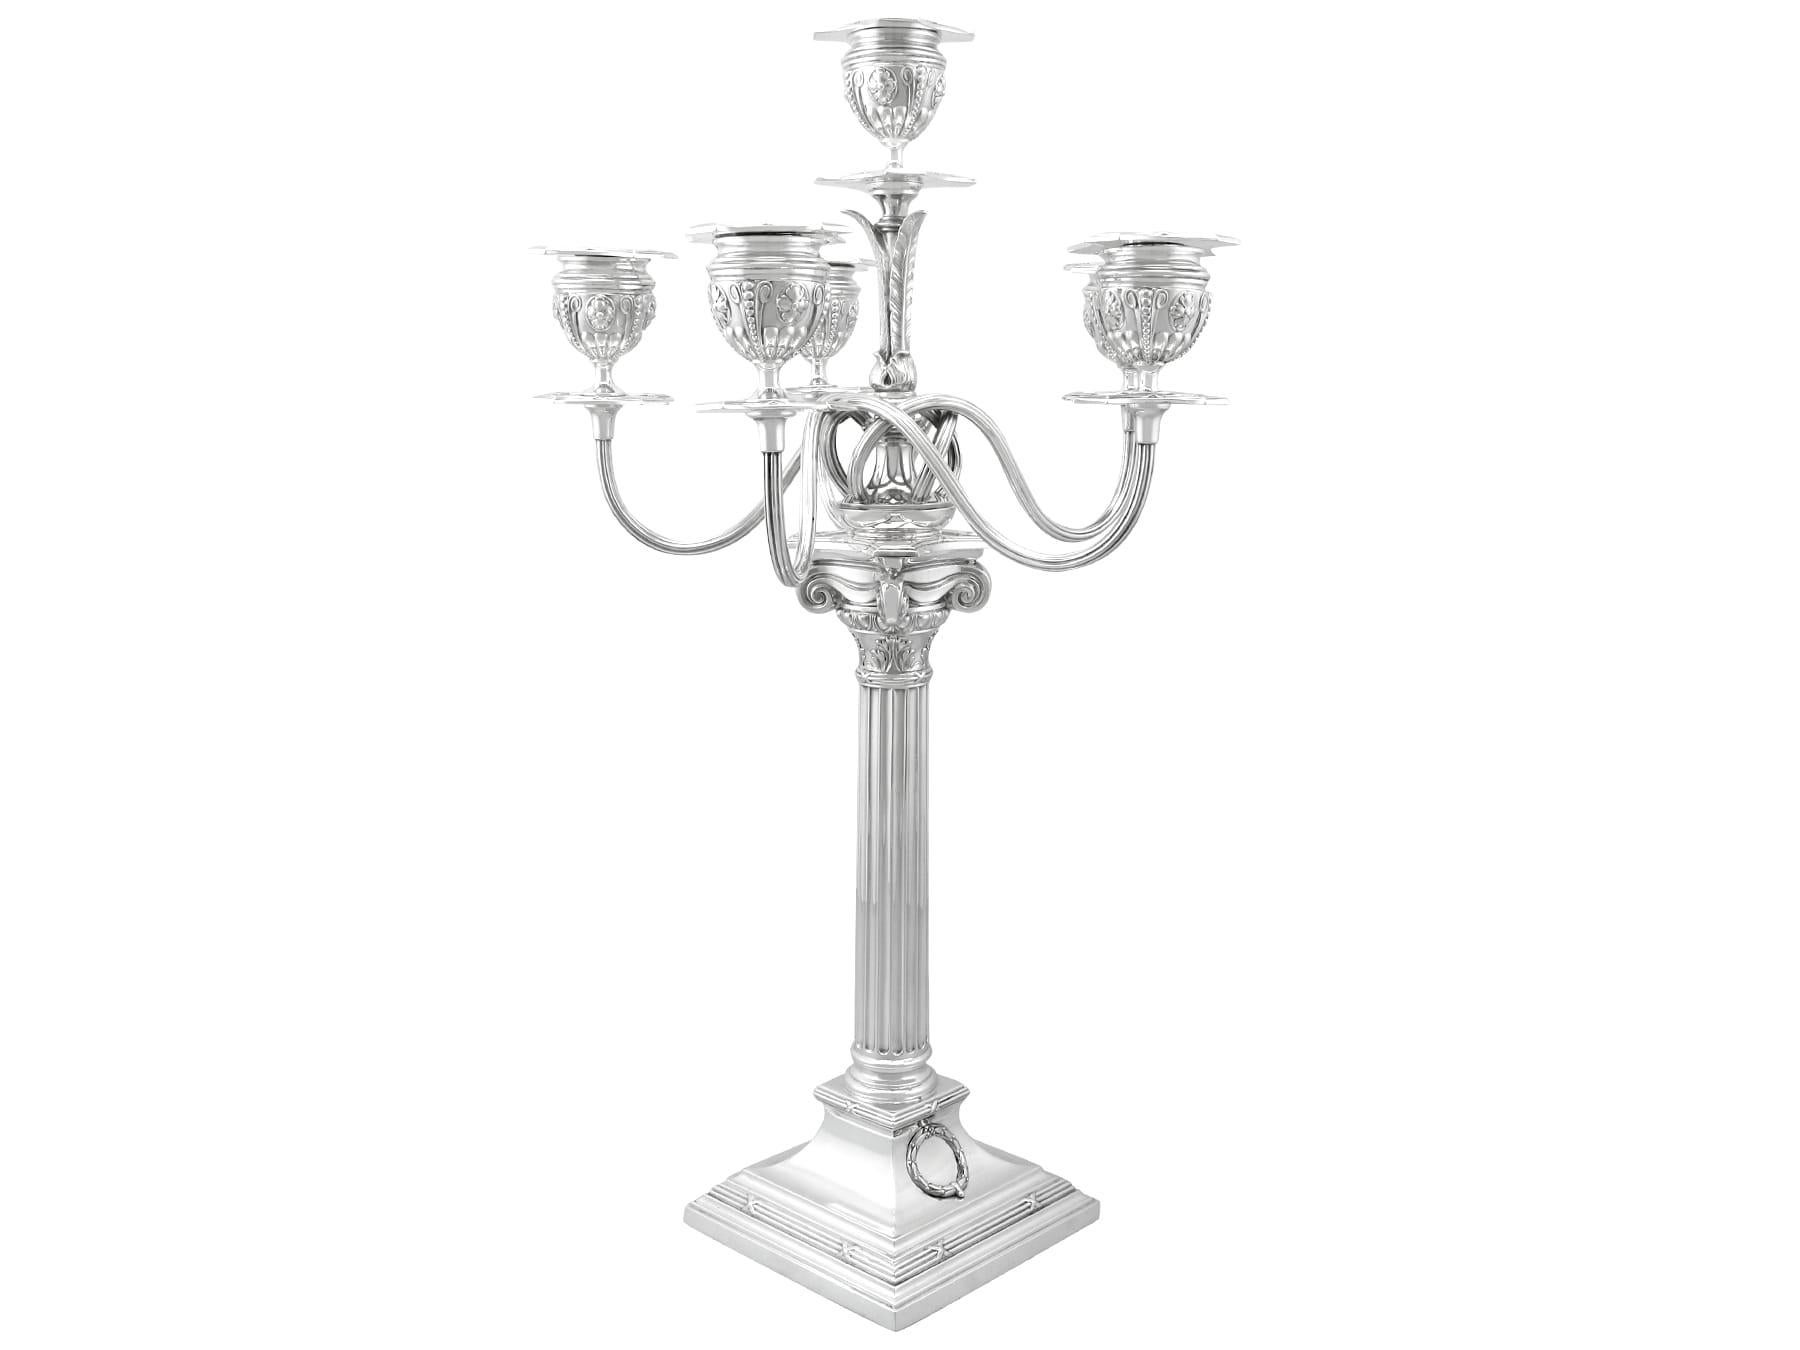 Antique German Silver Candelabra In Excellent Condition For Sale In Jesmond, Newcastle Upon Tyne